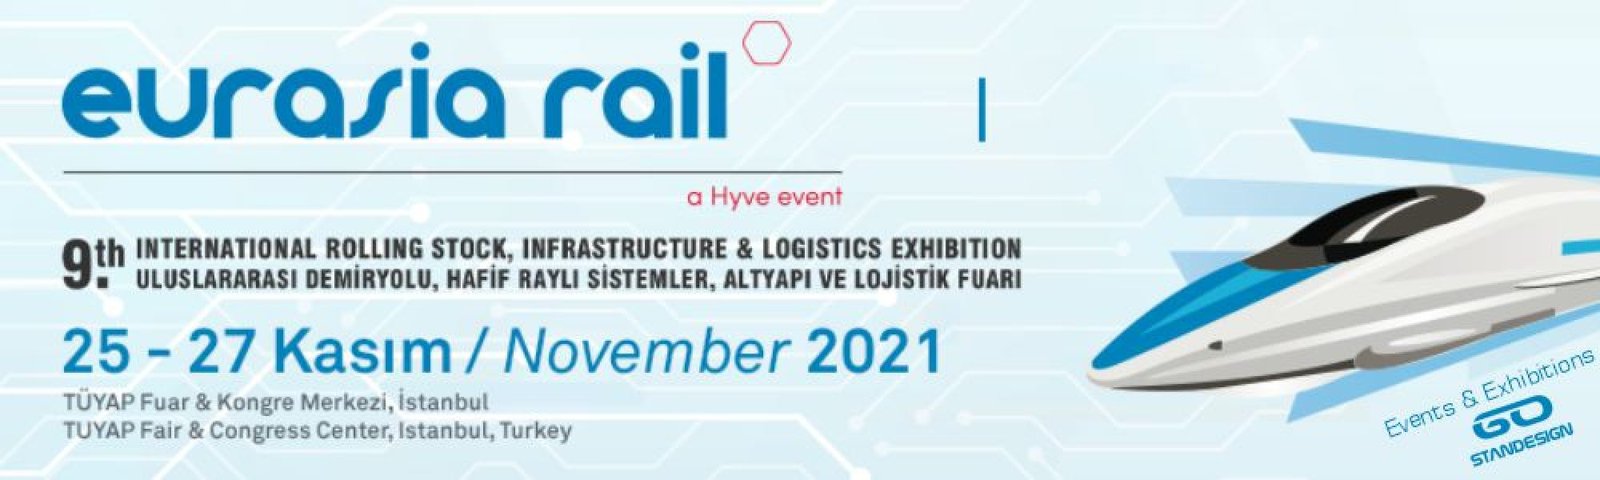 Eurasia Rail 2021 Exhibition Stand Constructions